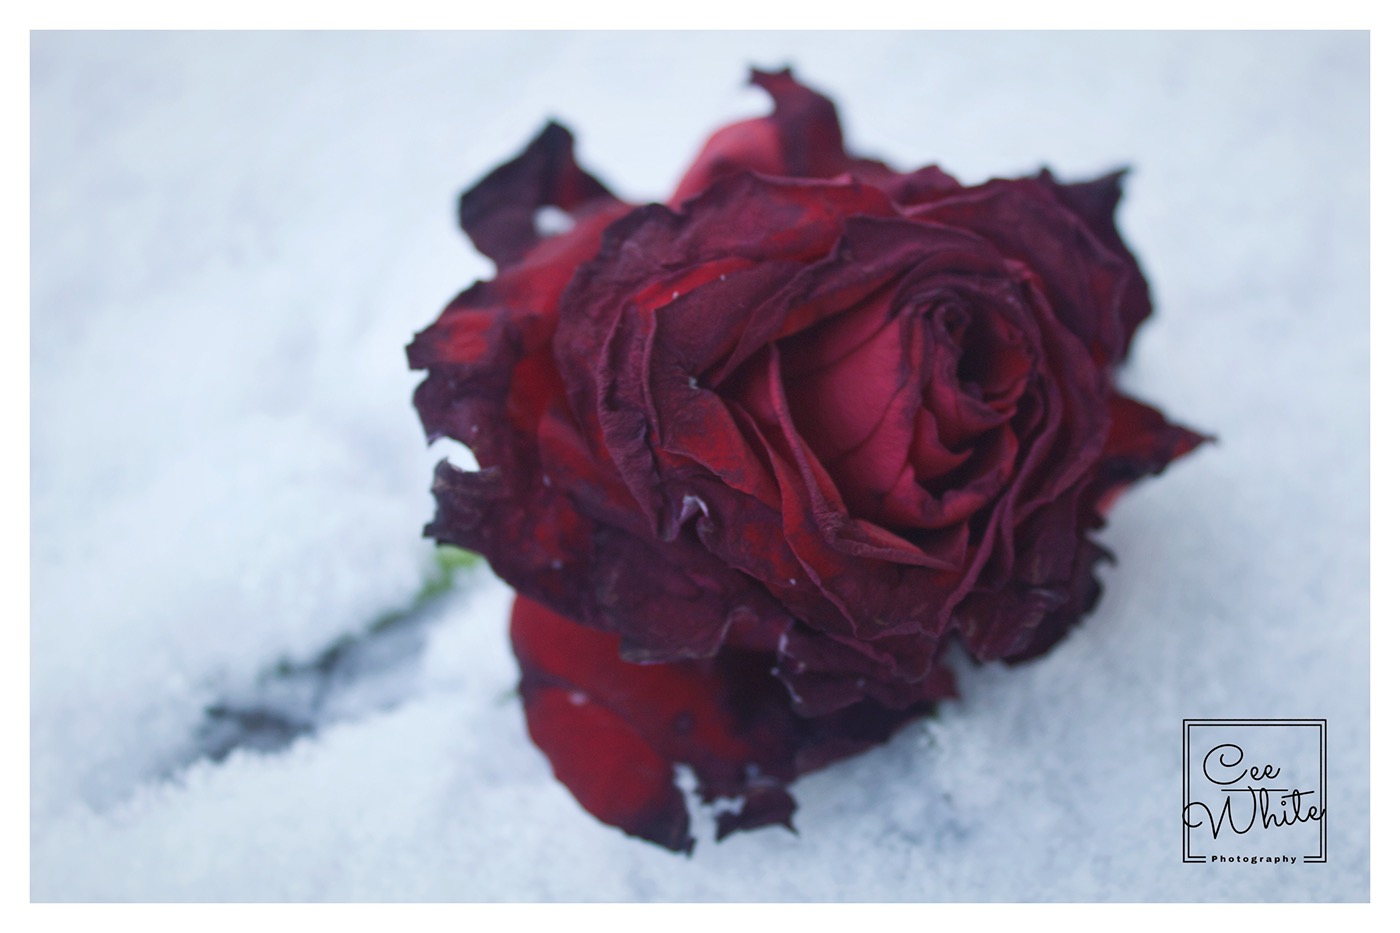 Roses snow Photography  Love leaves Poetry  Flowers Landscape art